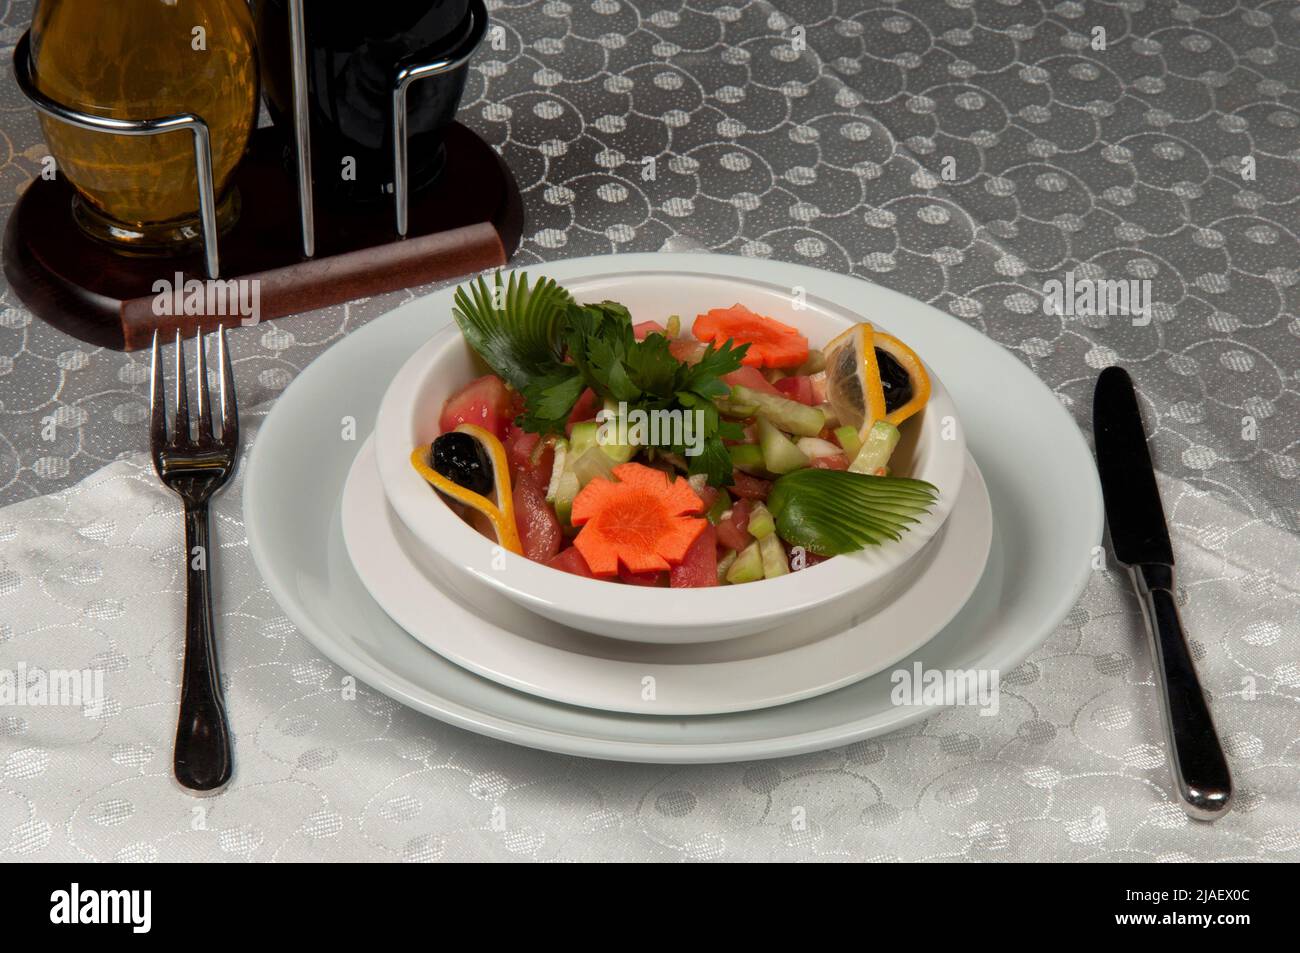 A plate of salad made of lettuce, tomato, corn, carrot, lemon and dill. Salad plate on the dining table. Stock Photo